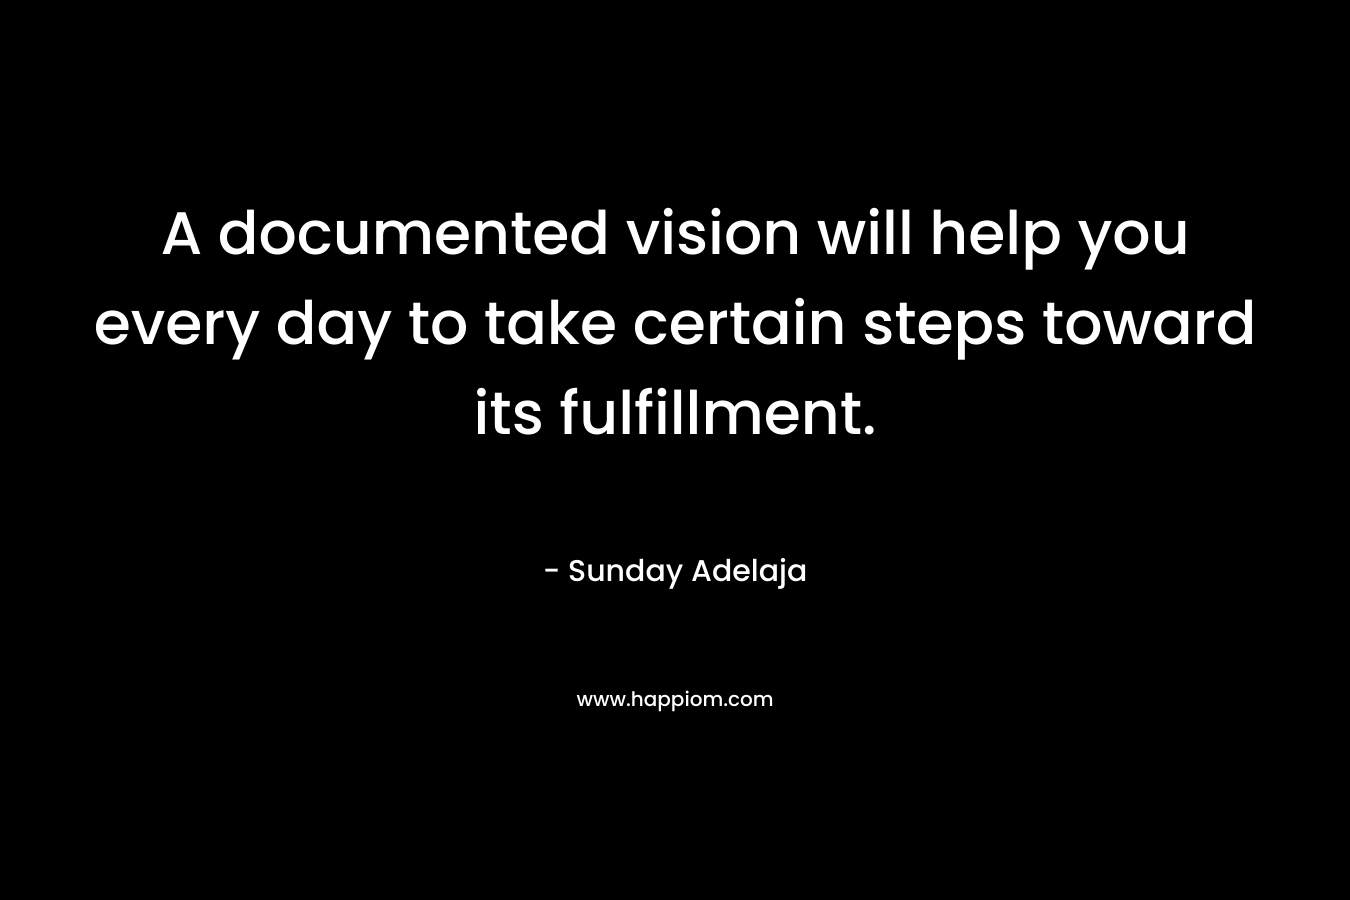 A documented vision will help you every day to take certain steps toward its fulfillment. – Sunday Adelaja